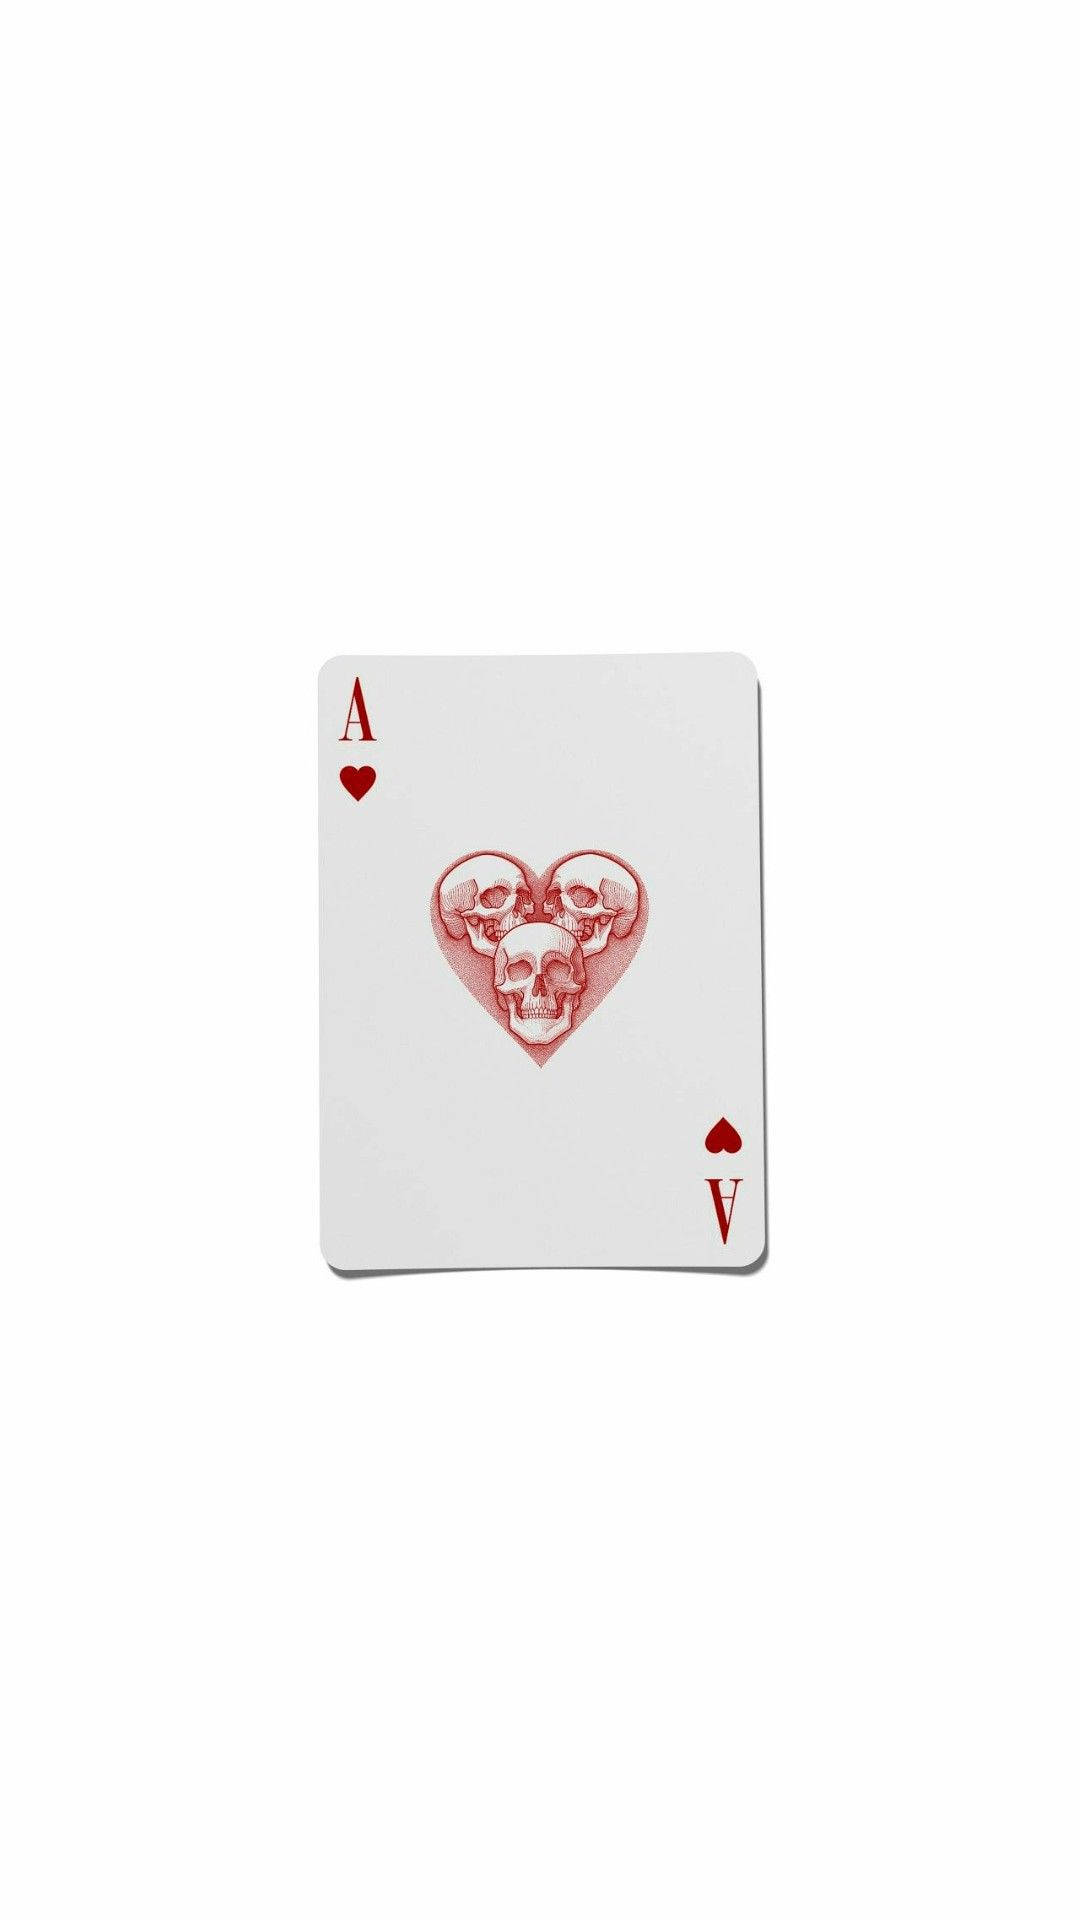 A Playing Card With A Heart On It Wallpaper